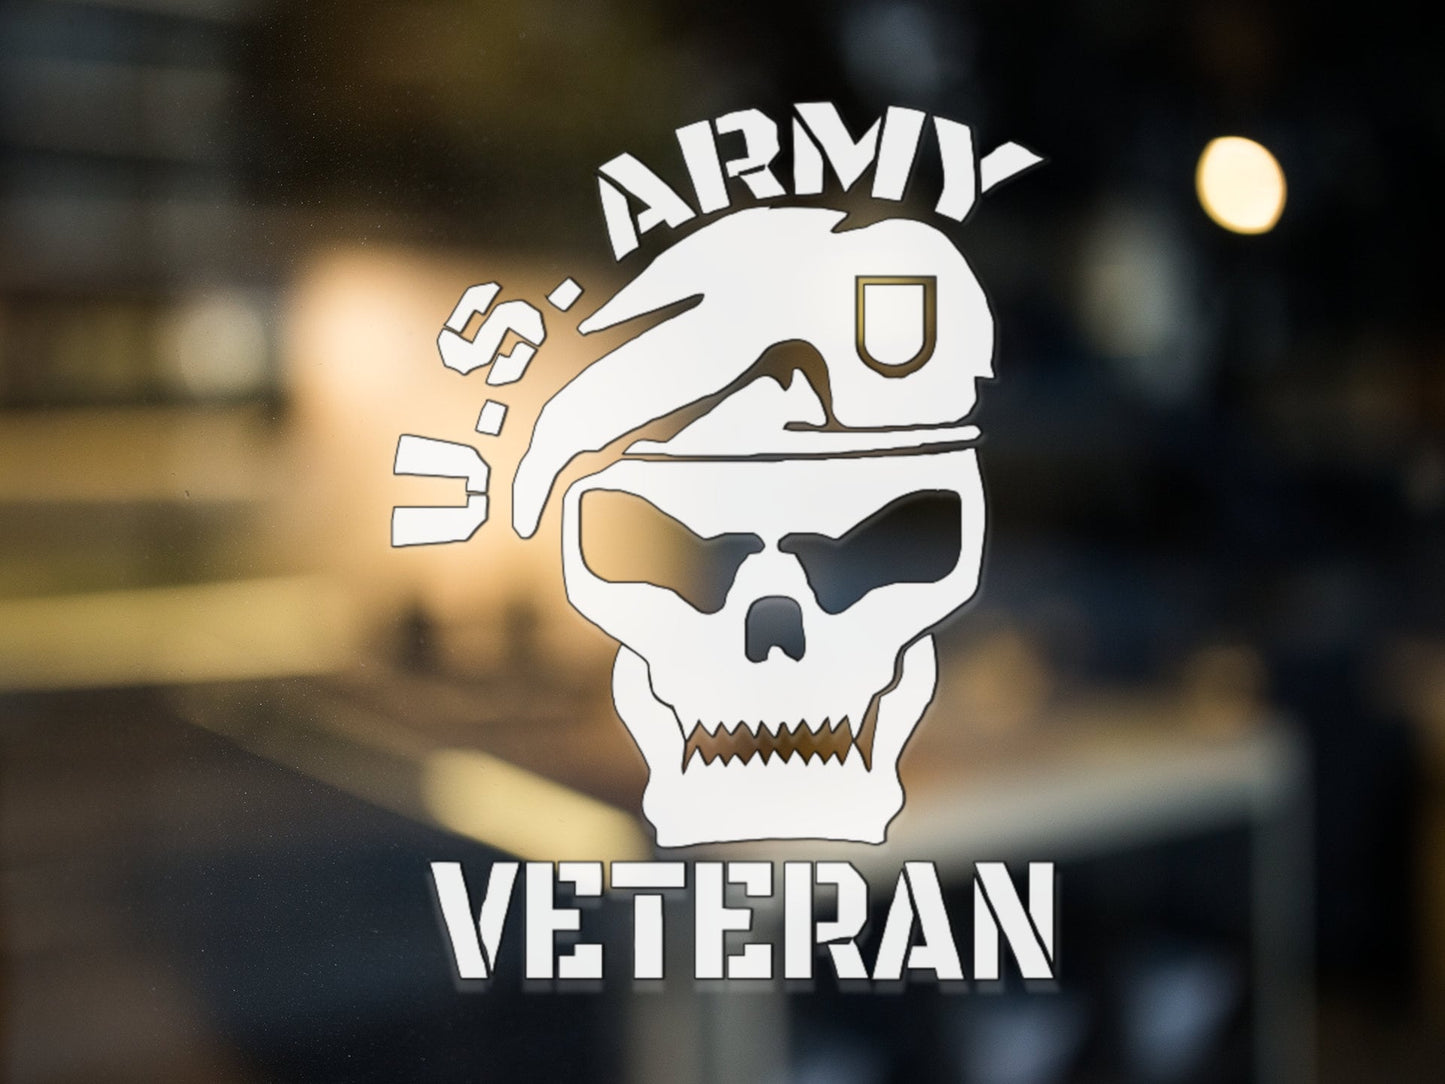 U.S. Army Veteran Skull Decal - Many Colors & Sizes